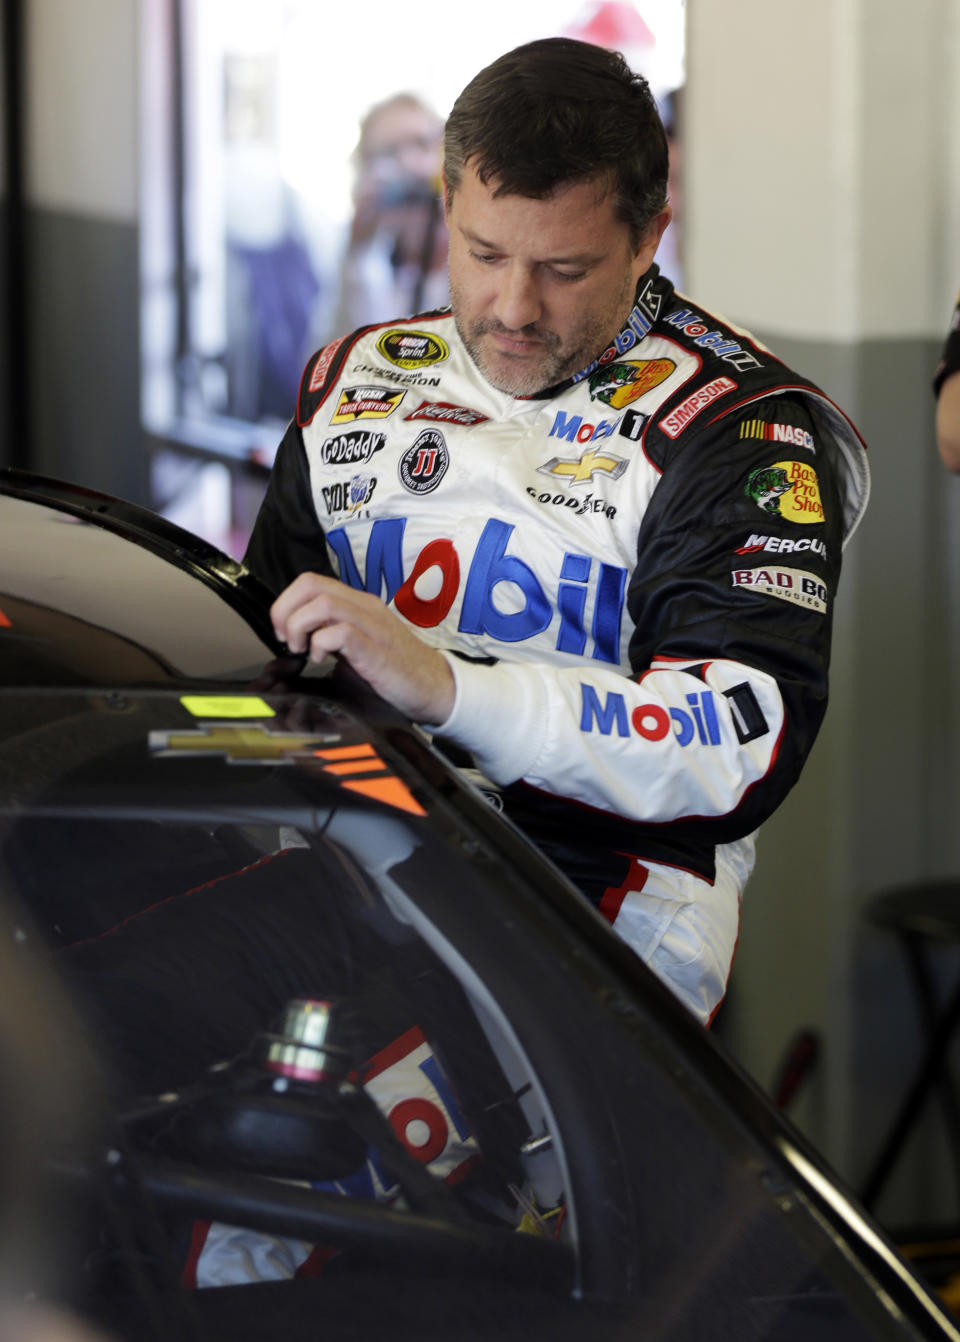 Driver Tony Stewart climbs in his car before practice for the NASCAR Sprint Unlimited auto race at Daytona International Speedway in Daytona Beach, Fla., Friday, Feb. 14, 2014. Stewart has not raced in more than six months since he broke two bones in his leg in an August 2013 sprint-car crash.(AP Photo/John Raoux)